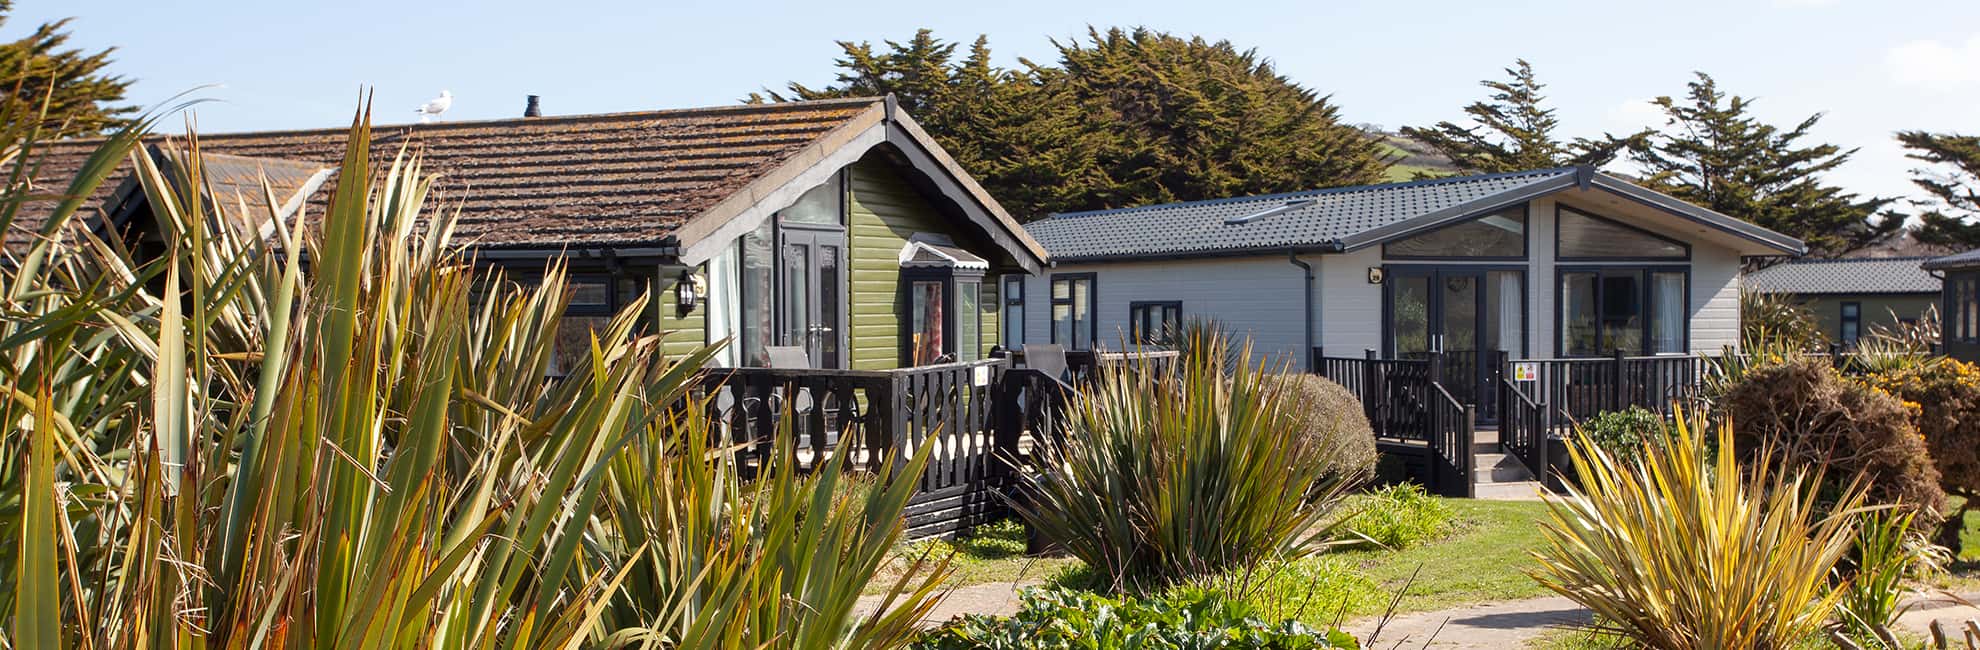 Luxury lodges and greenery at Ruda Holiday Park in Devon